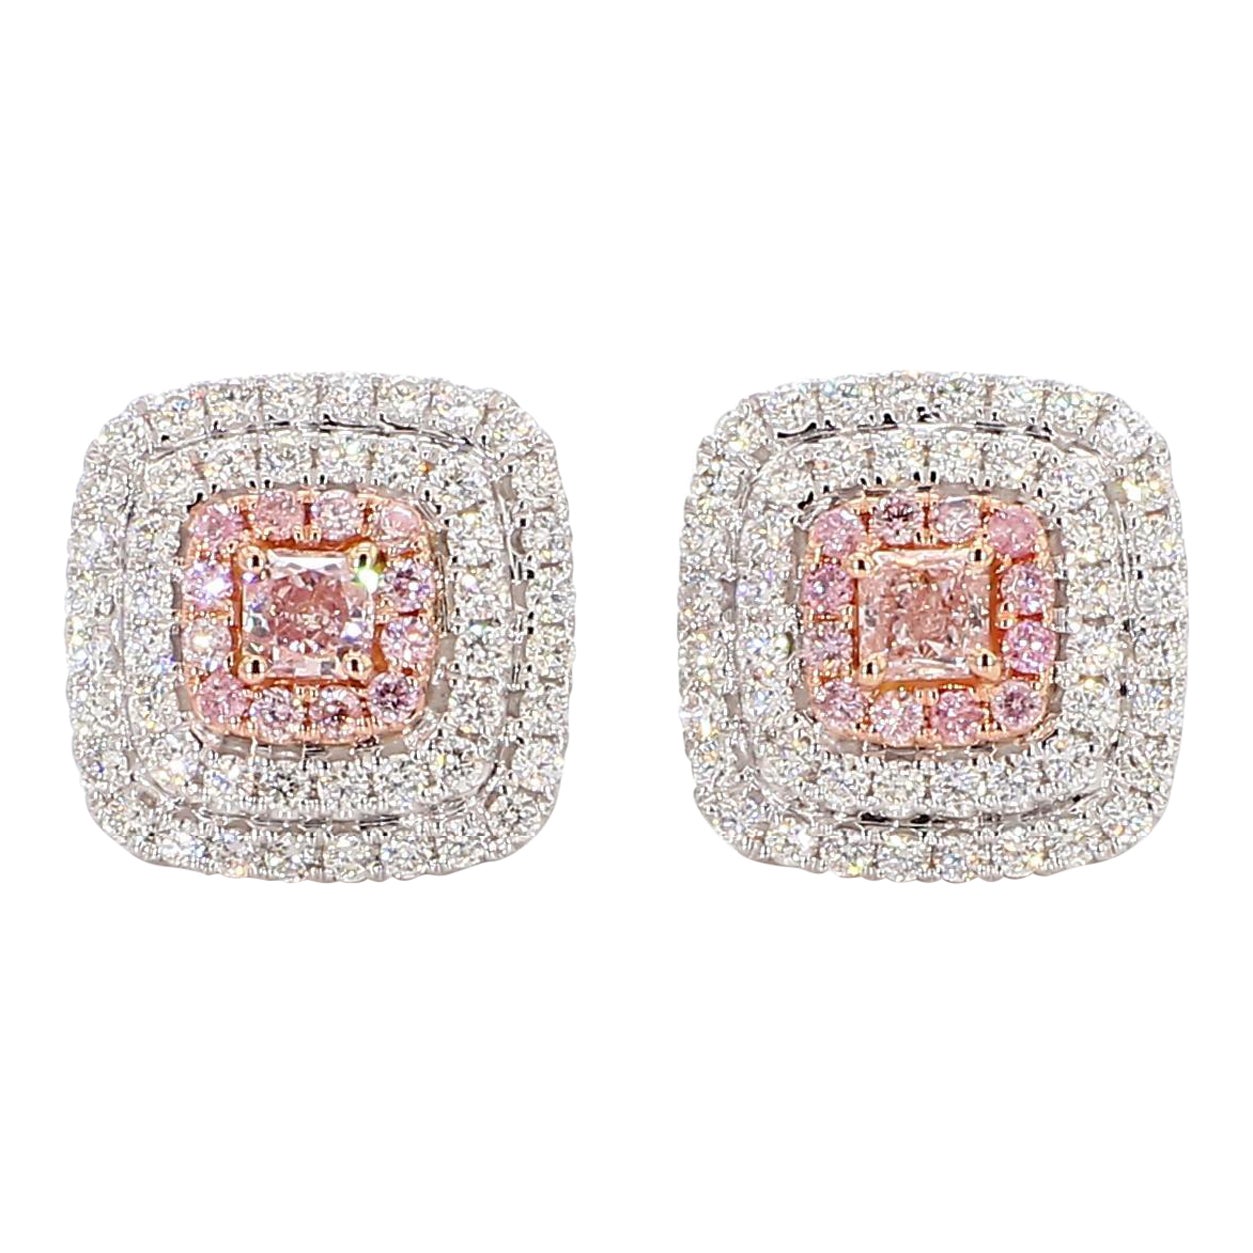 GIA Certified Natural Pink Radiant Diamond 1.17 Carat TW Gold Stud Earrings